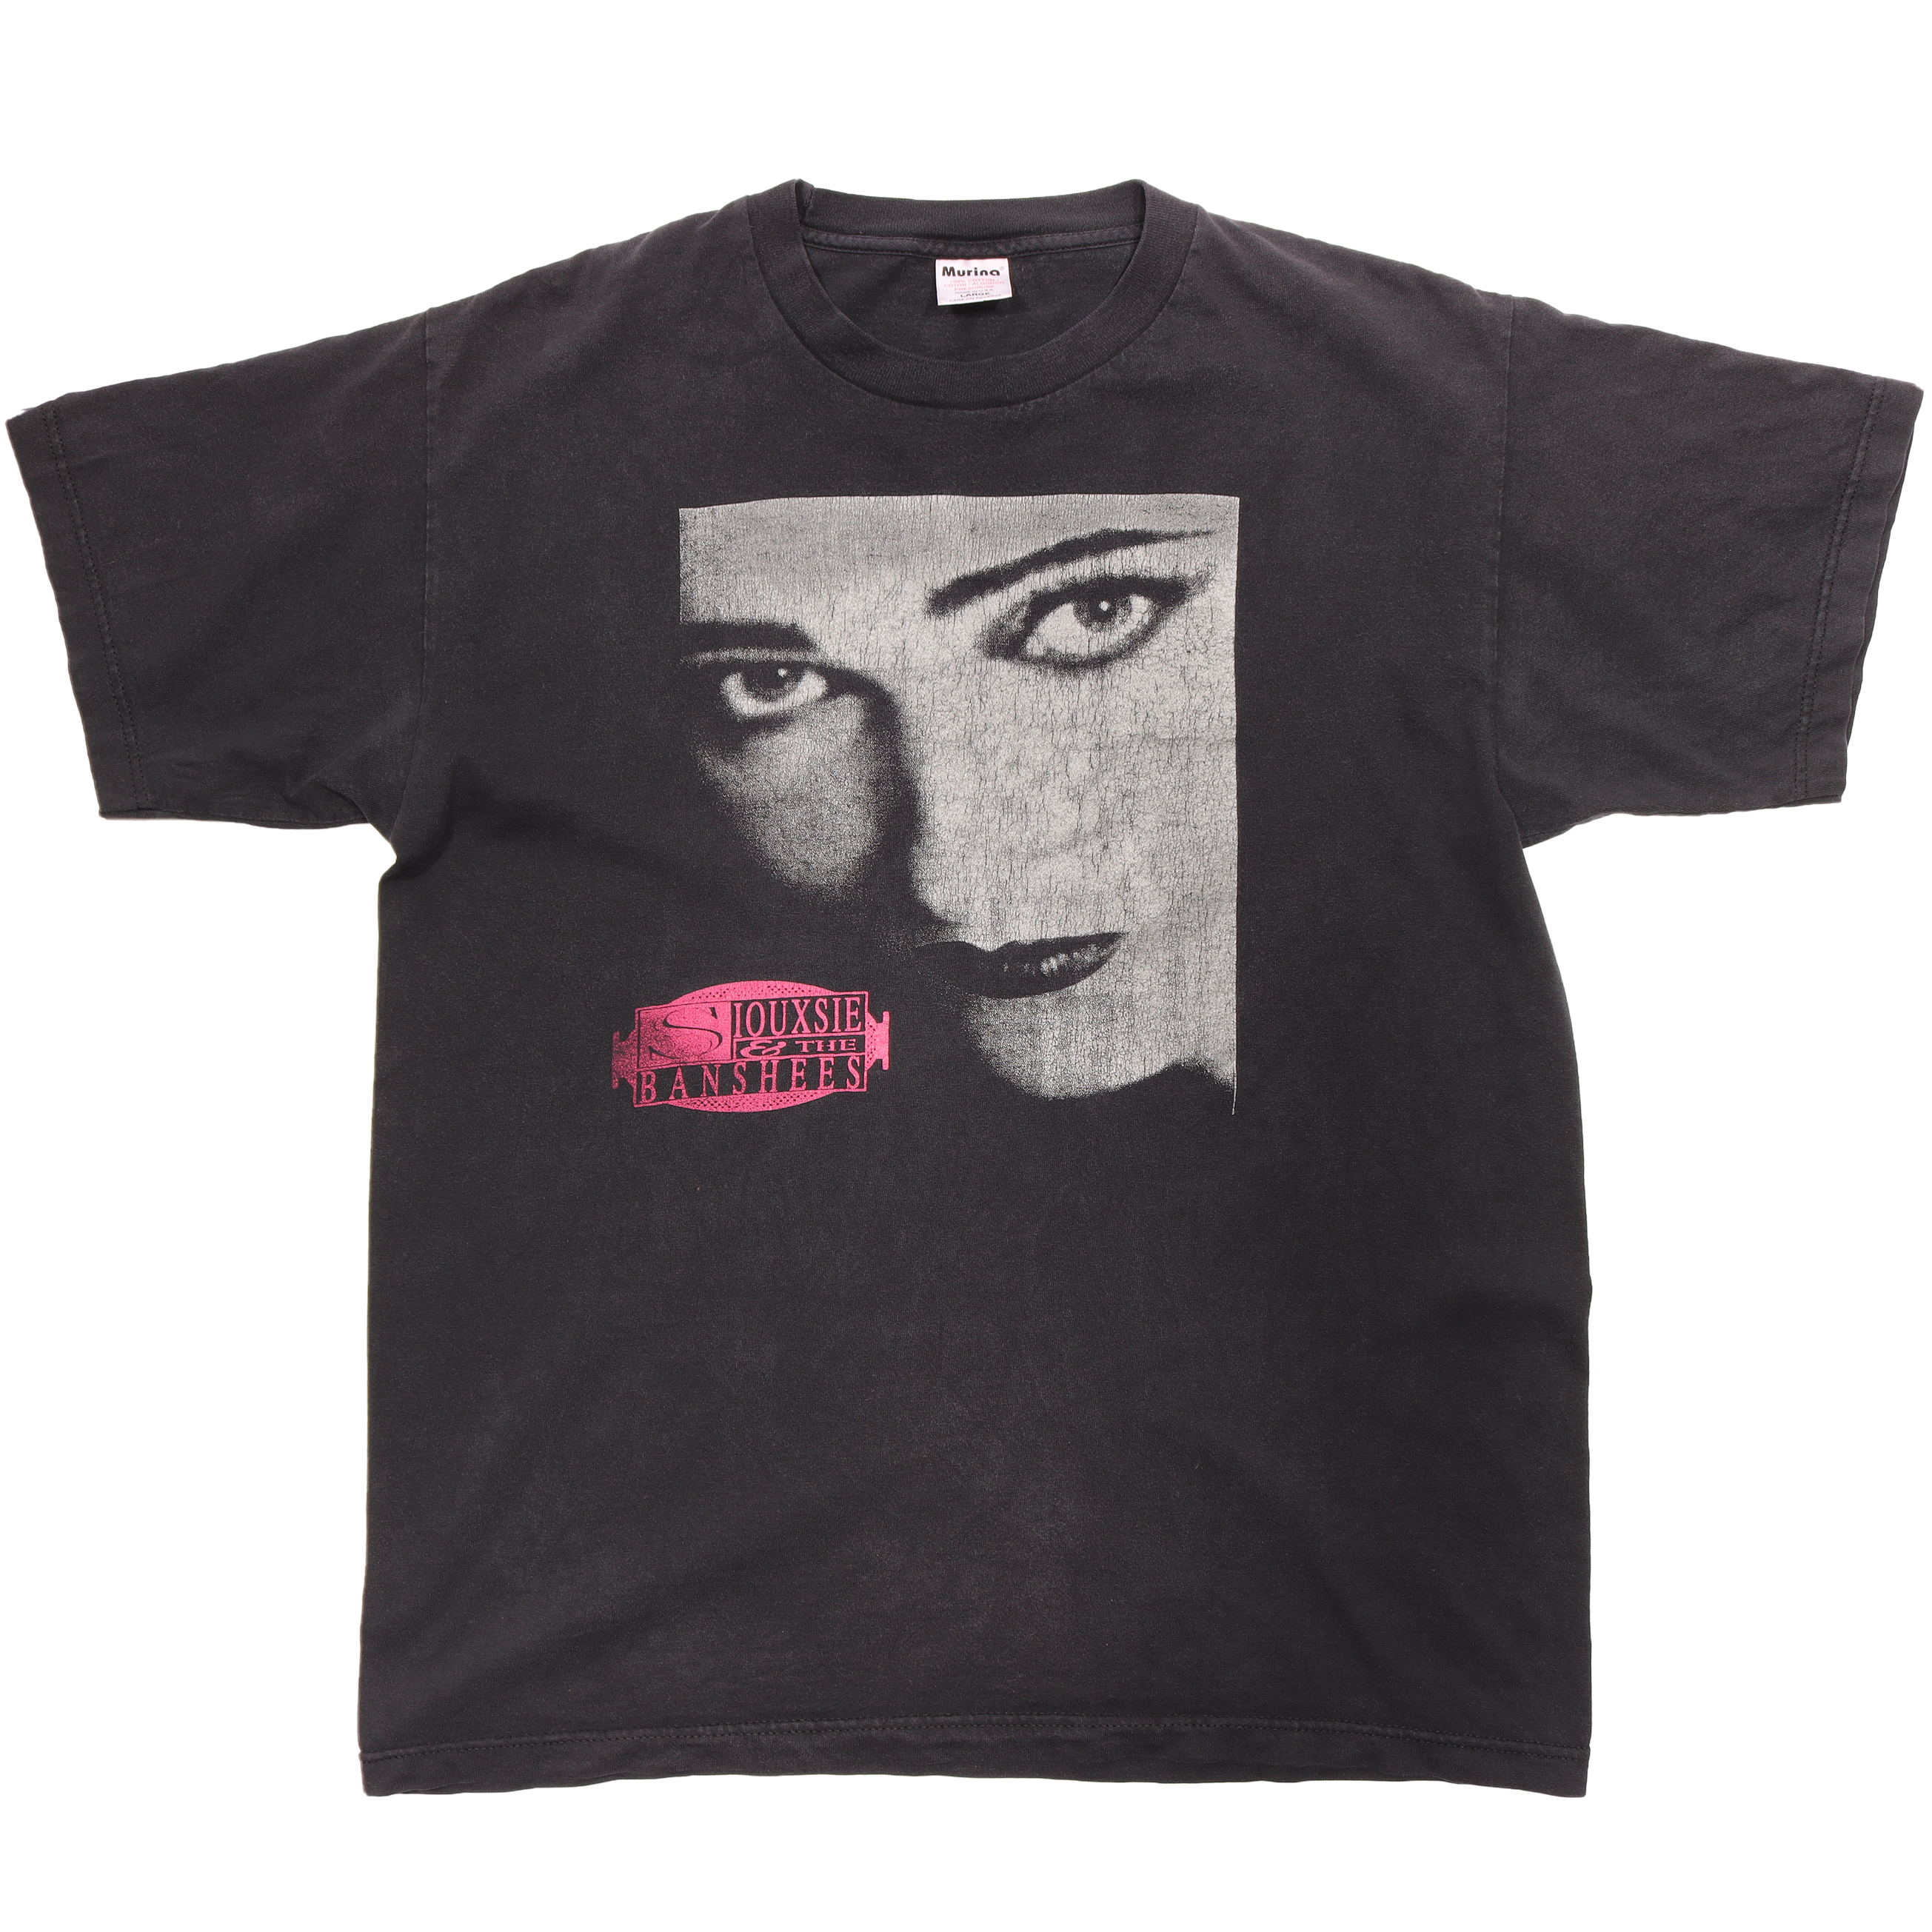 Siouxsie and The Banshees T-Shirt